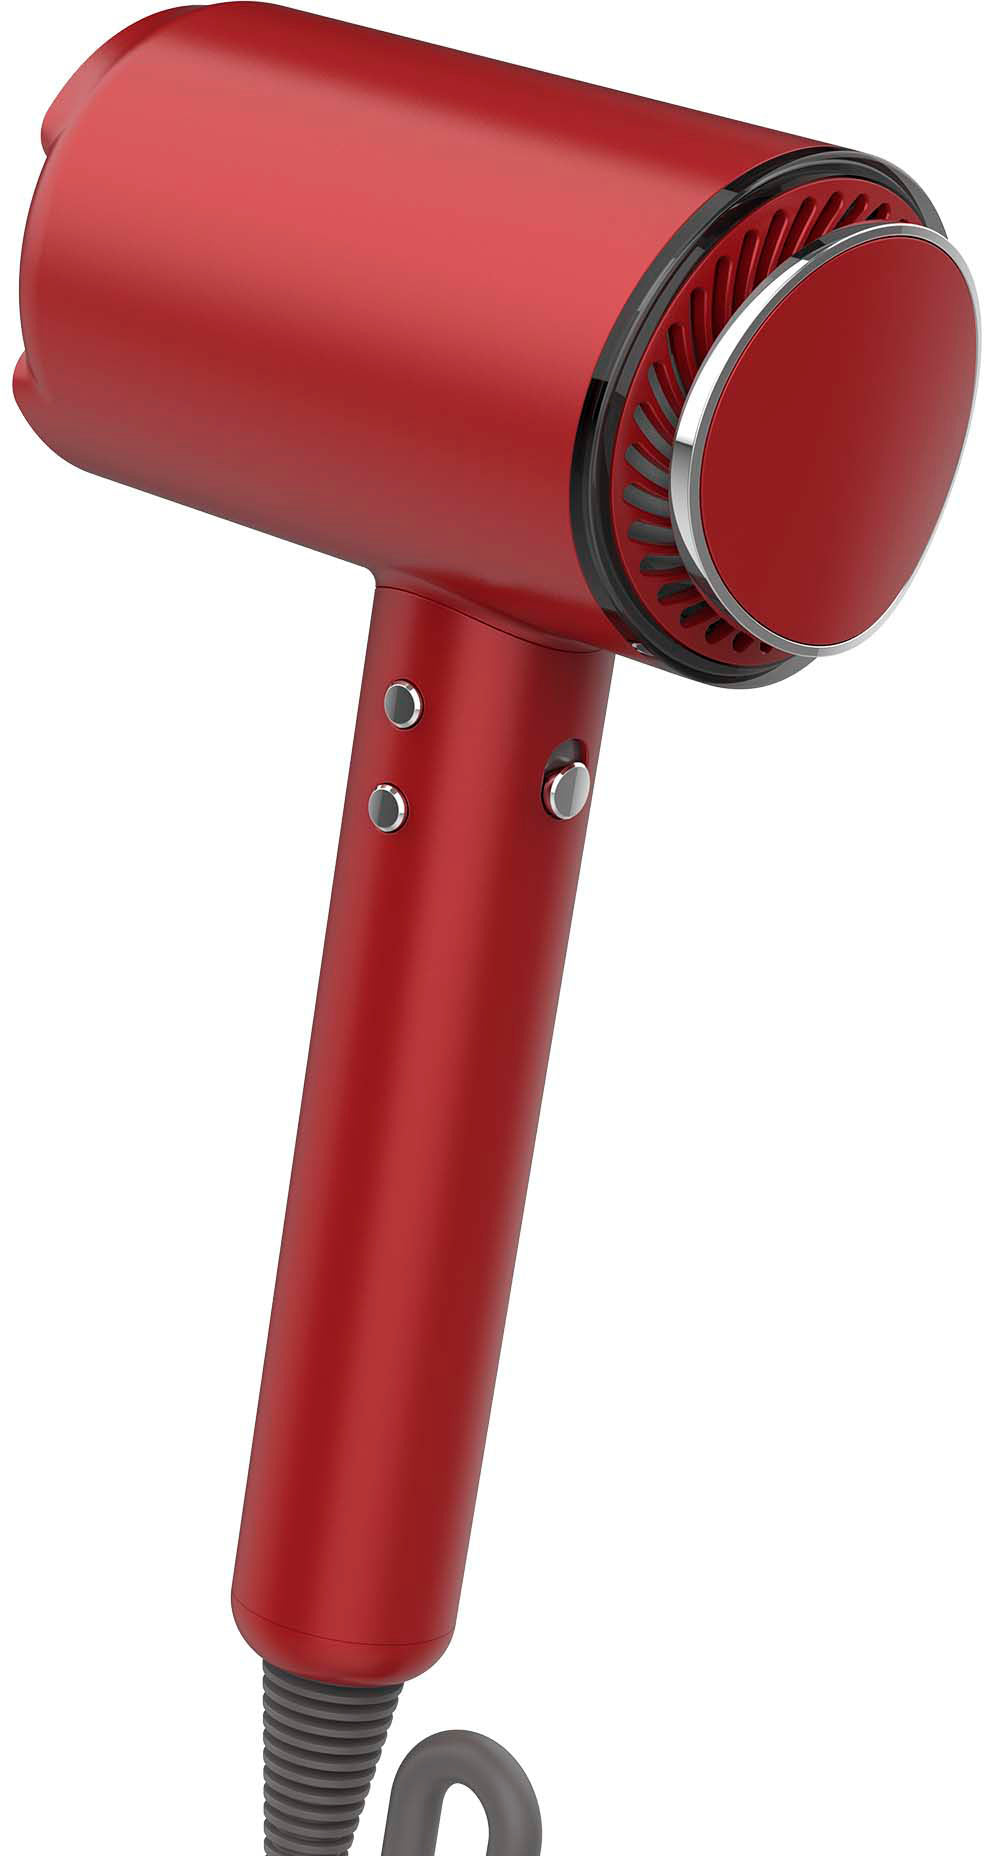 Tineco - Smart Ionic Hair Dryer - Red (HD050400US)